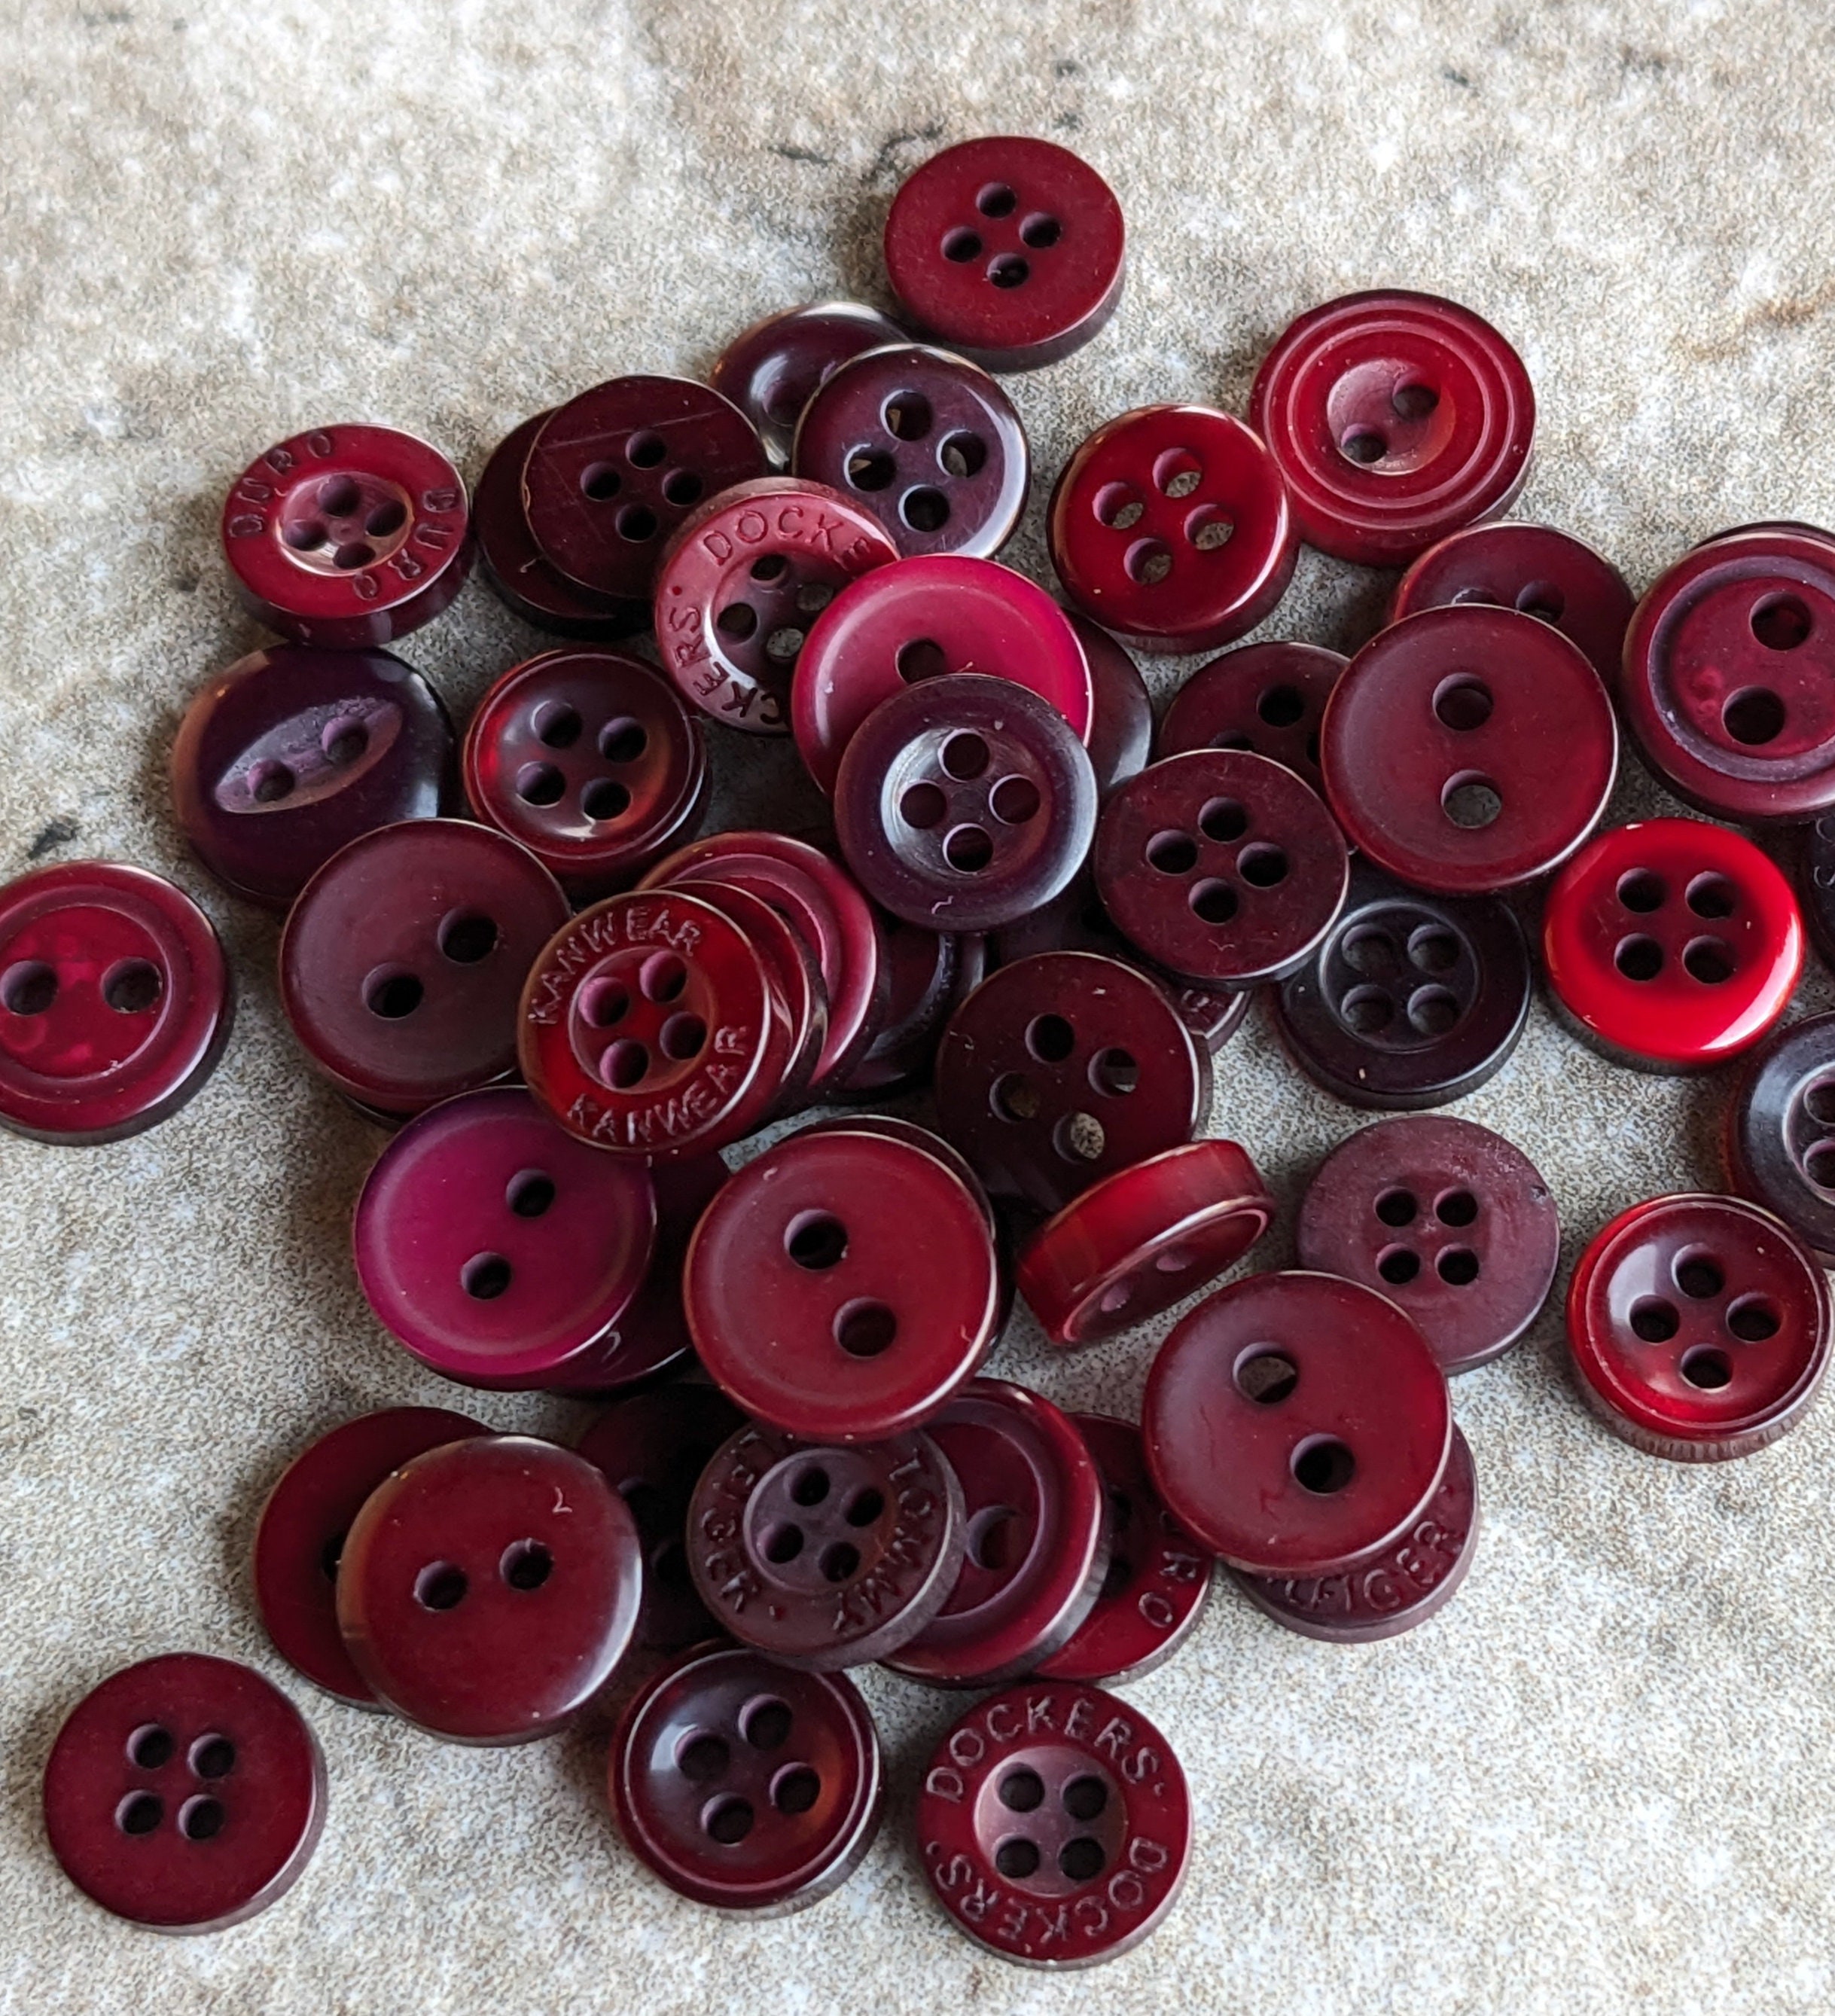 Wine Red Buttons 100 Bulk Assorted Round Multi Size Crafting